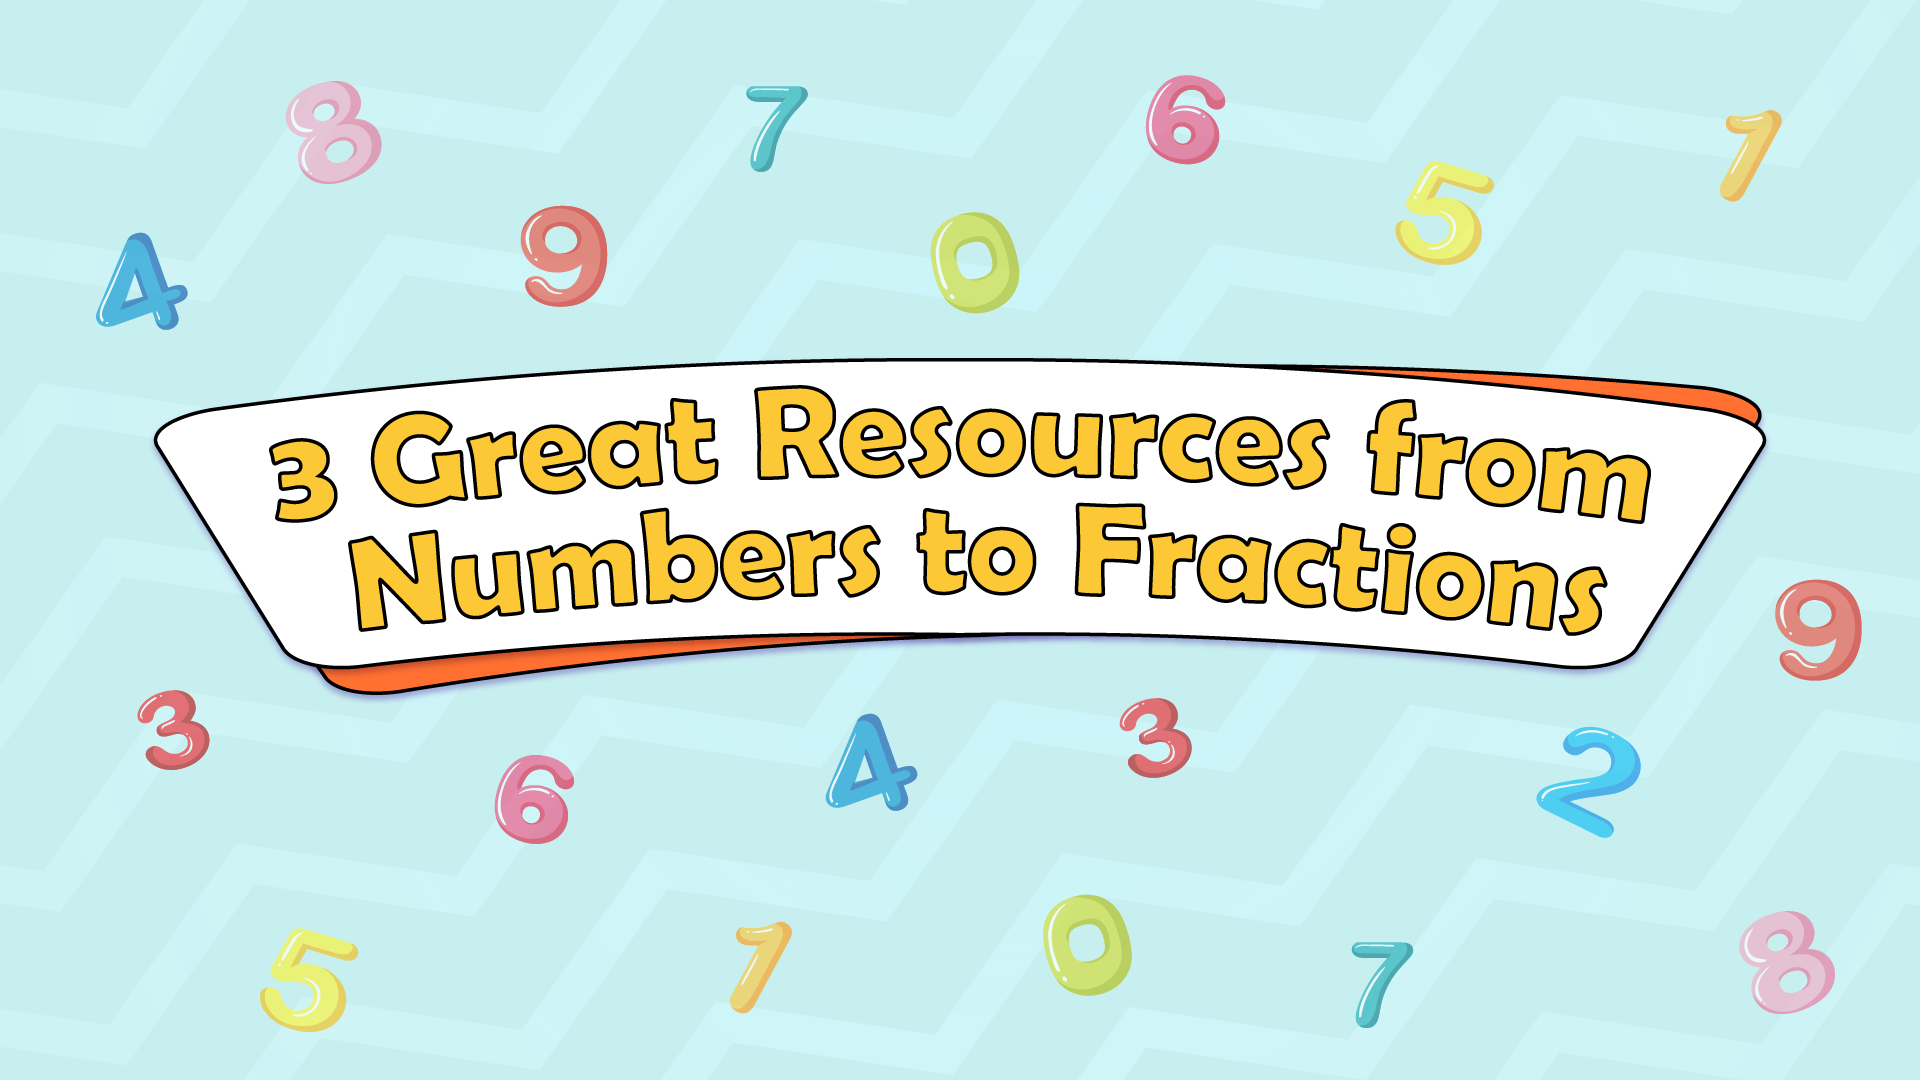 Maths Resources: 3 Great Resources from Numbers to Fractions